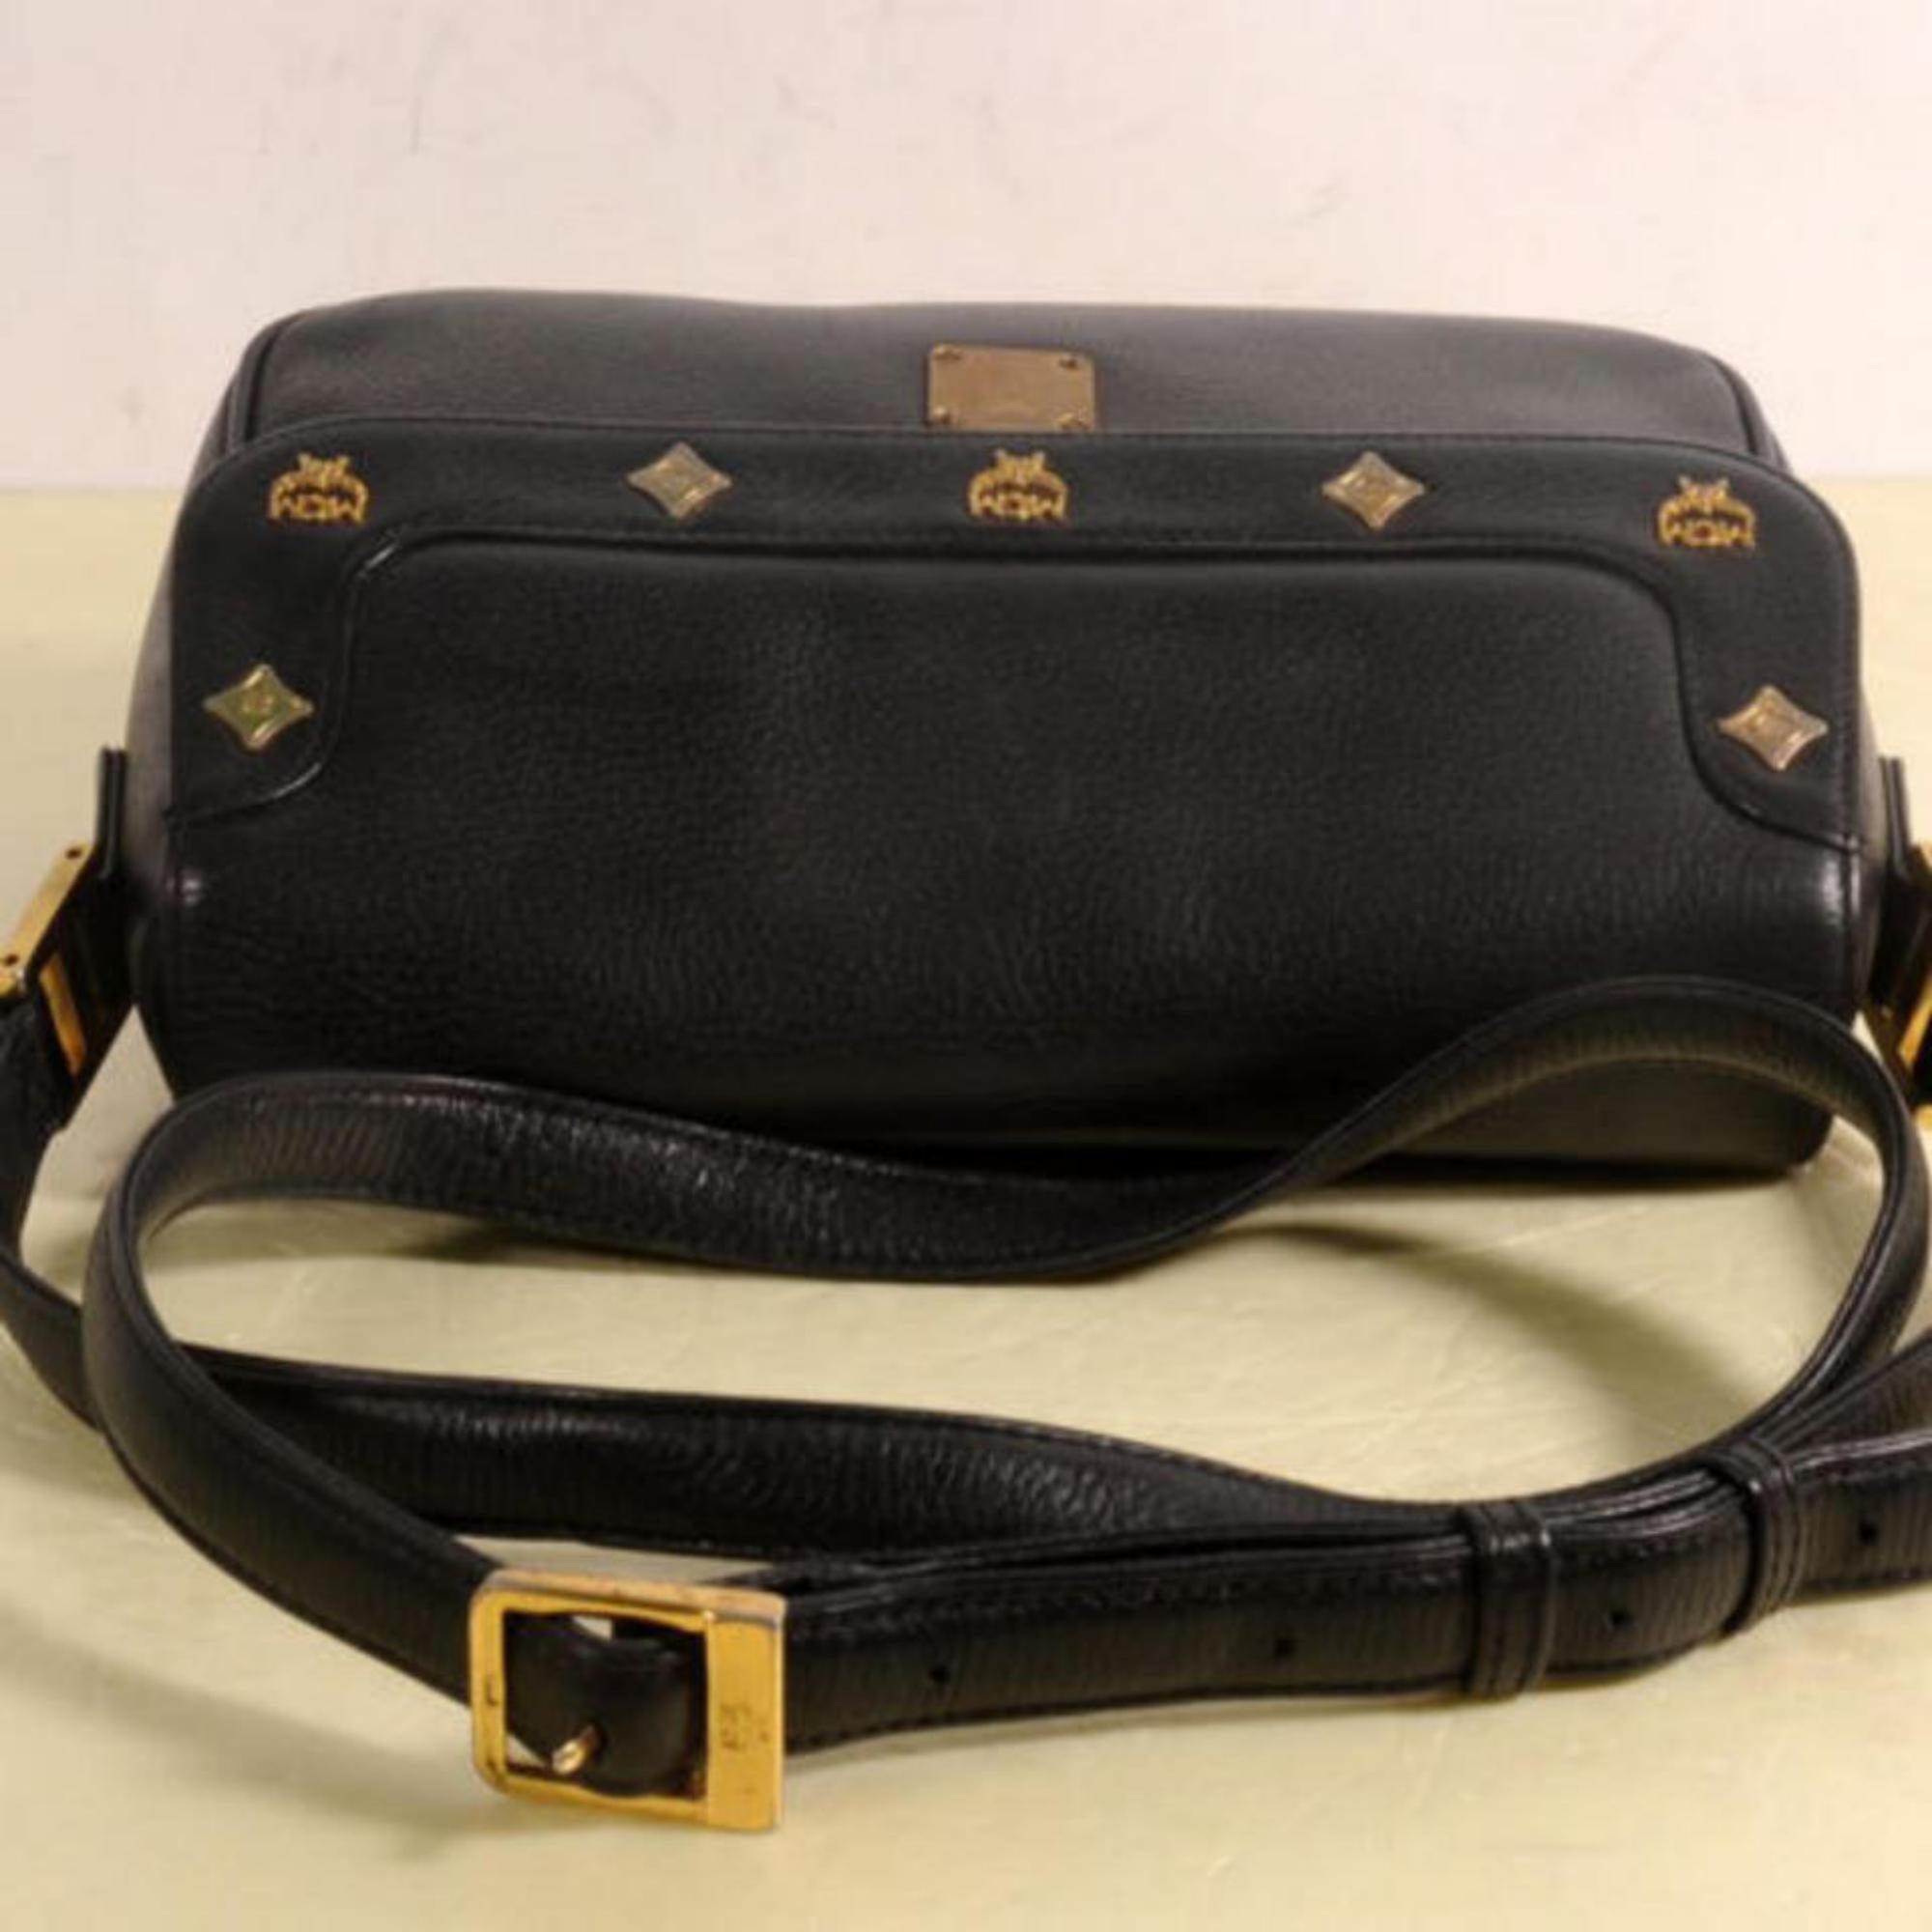 MCM Studded Camera 868503 Black Leather Shoulder Bag In Good Condition For Sale In Forest Hills, NY